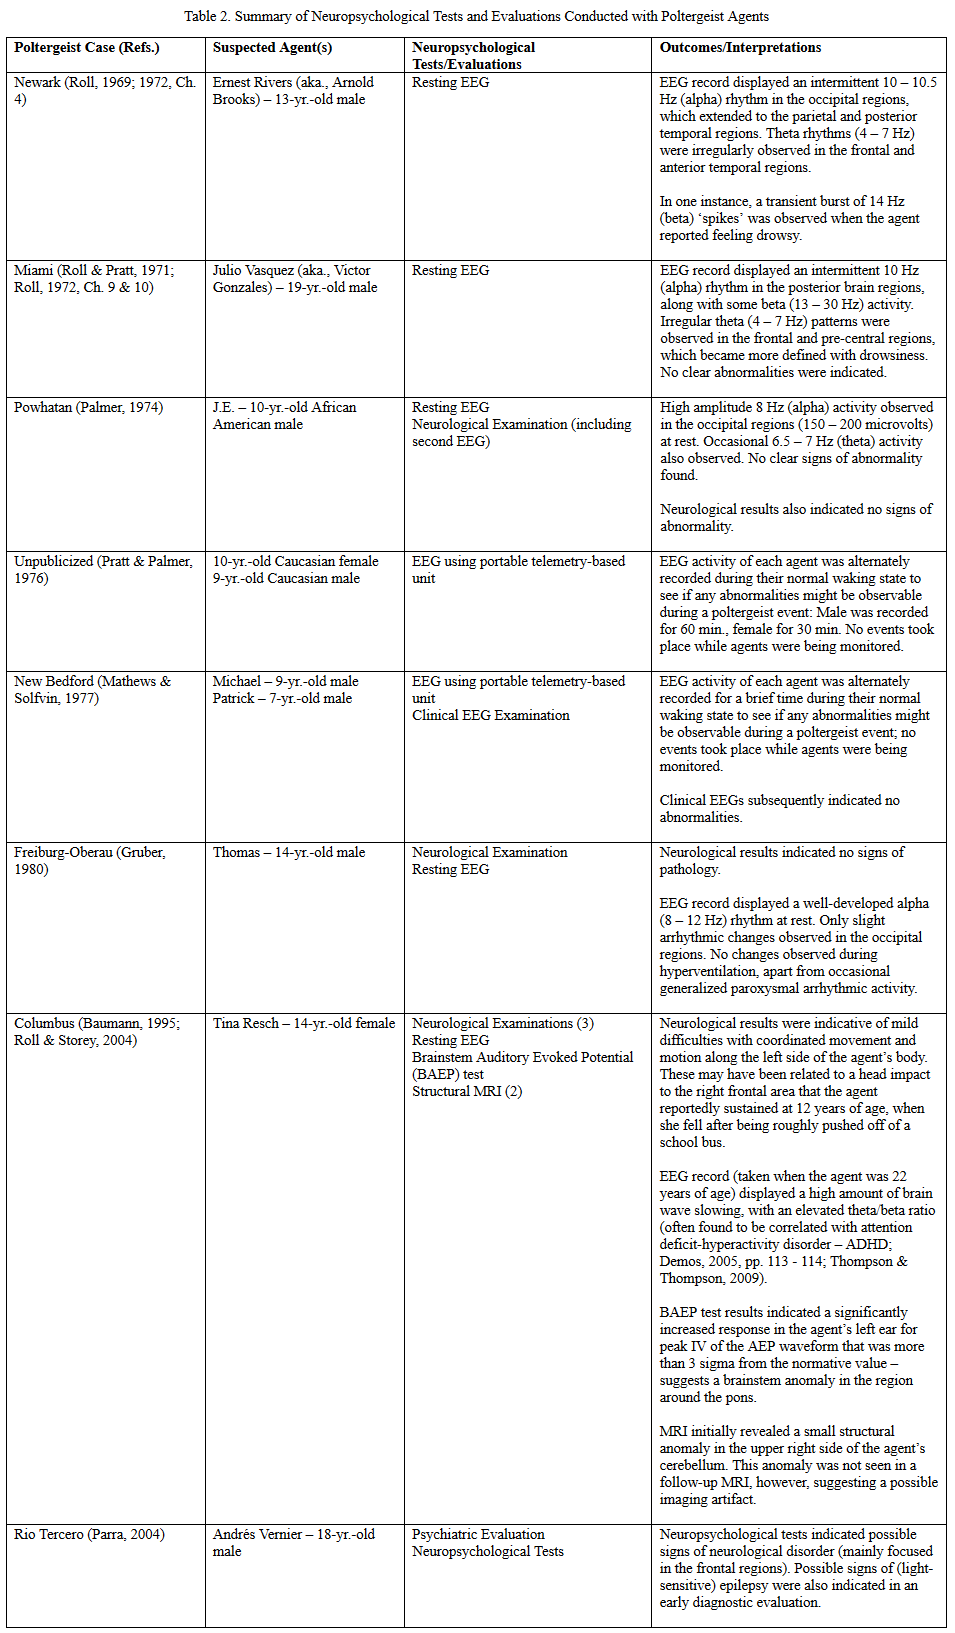 Table 2. Summary of Neuropsychological Tests and Evaluations Conducted with Poltergeist Agents